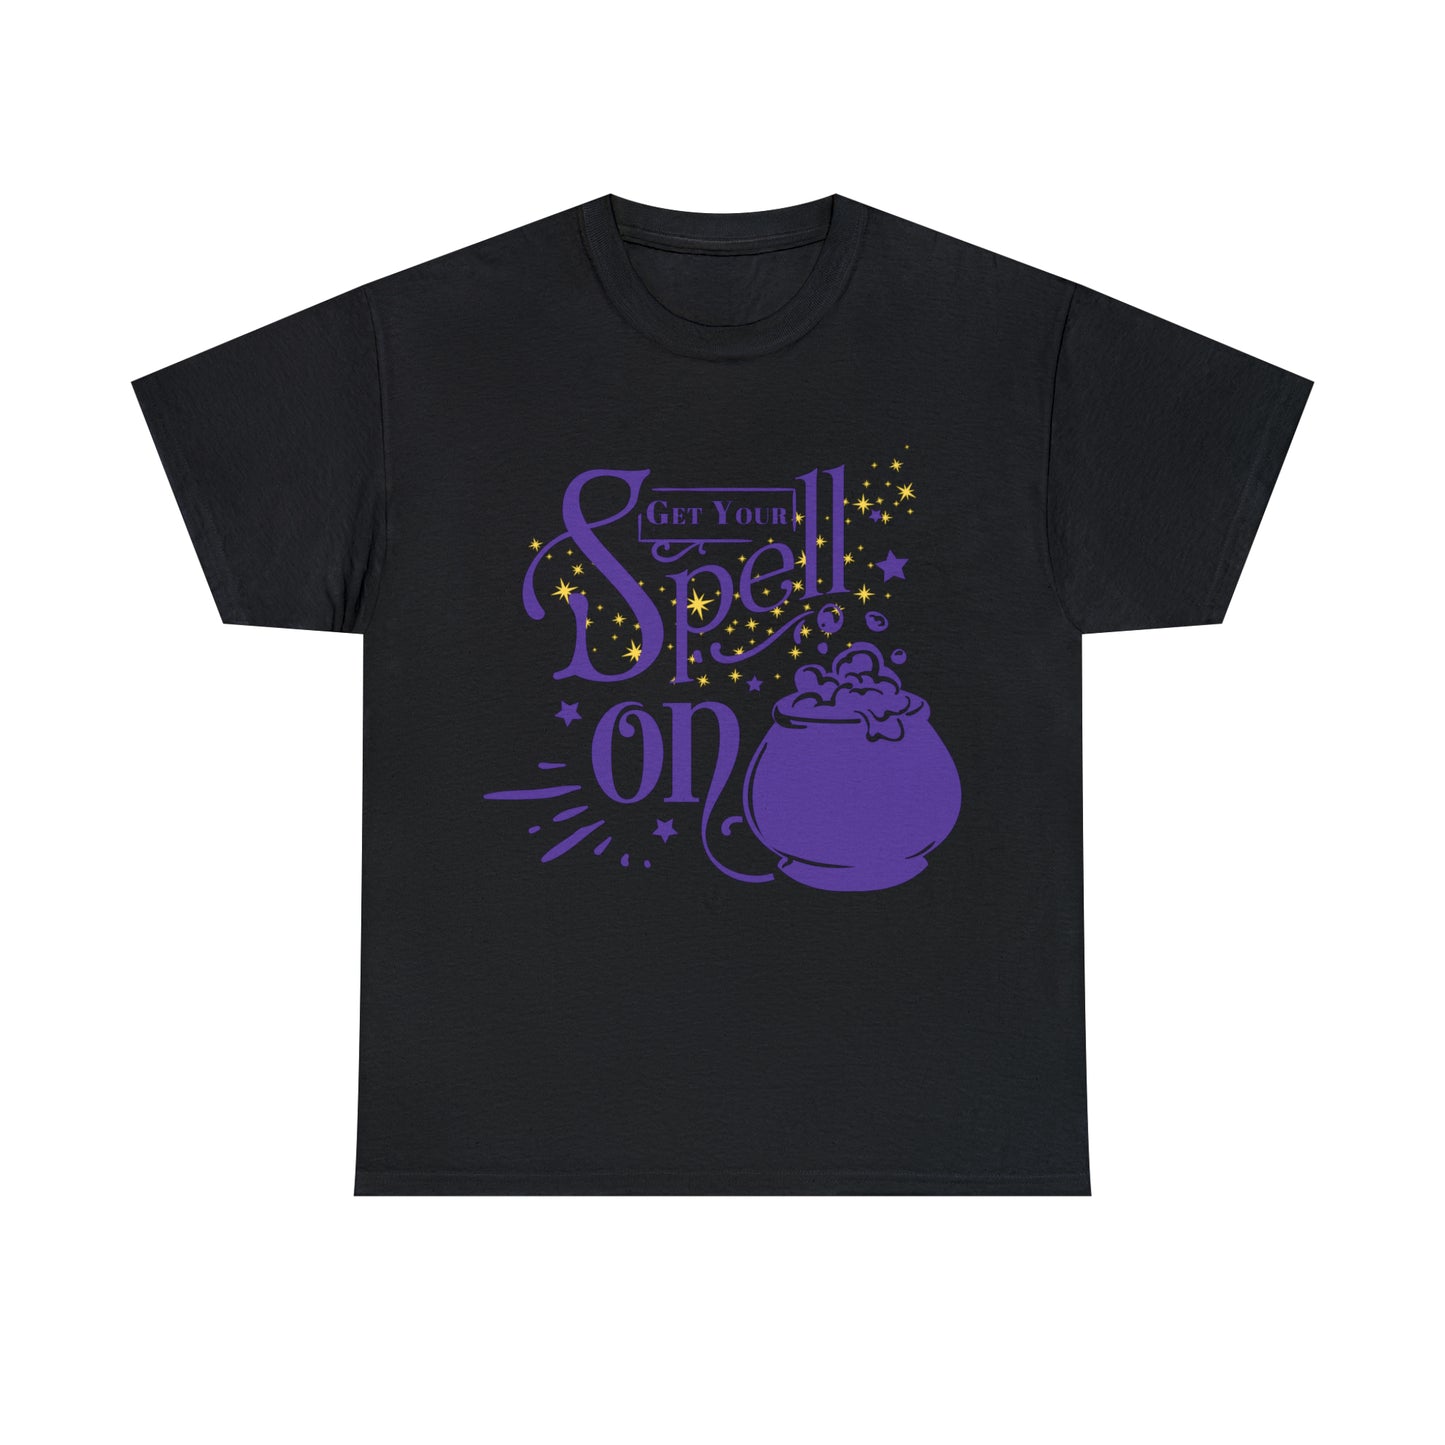 Get Your Spell On - Unisex Heavy Cotton Tee